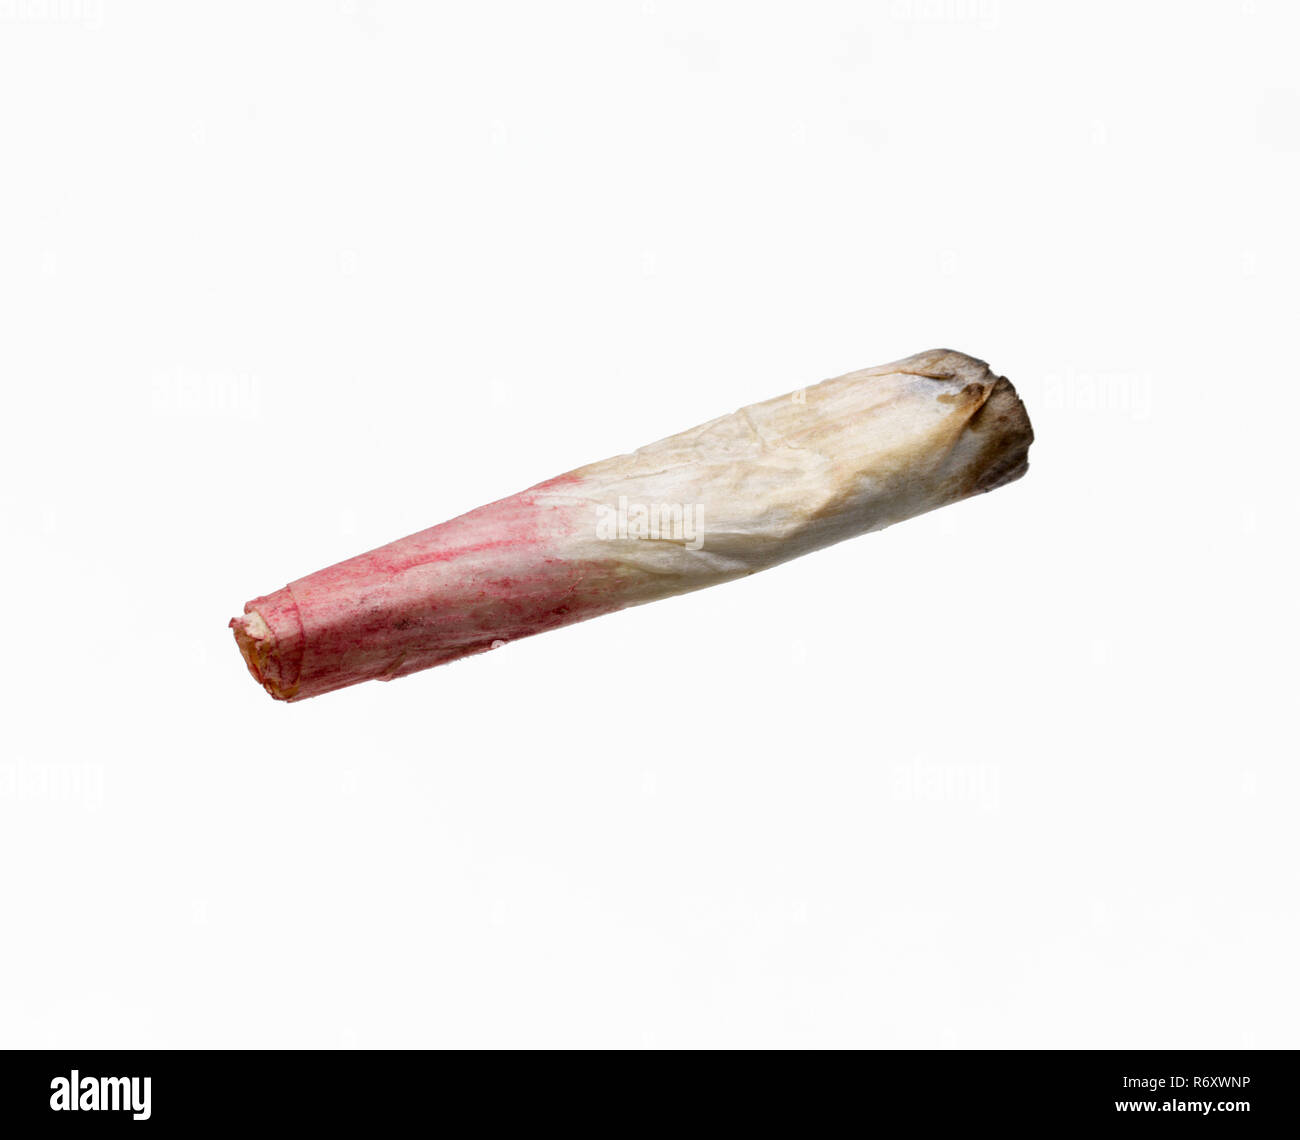 A cannabis cigarette aka 'joint' that has been smoked by a woman wearing lipstick, leaving a 'roach'. Stock Photo